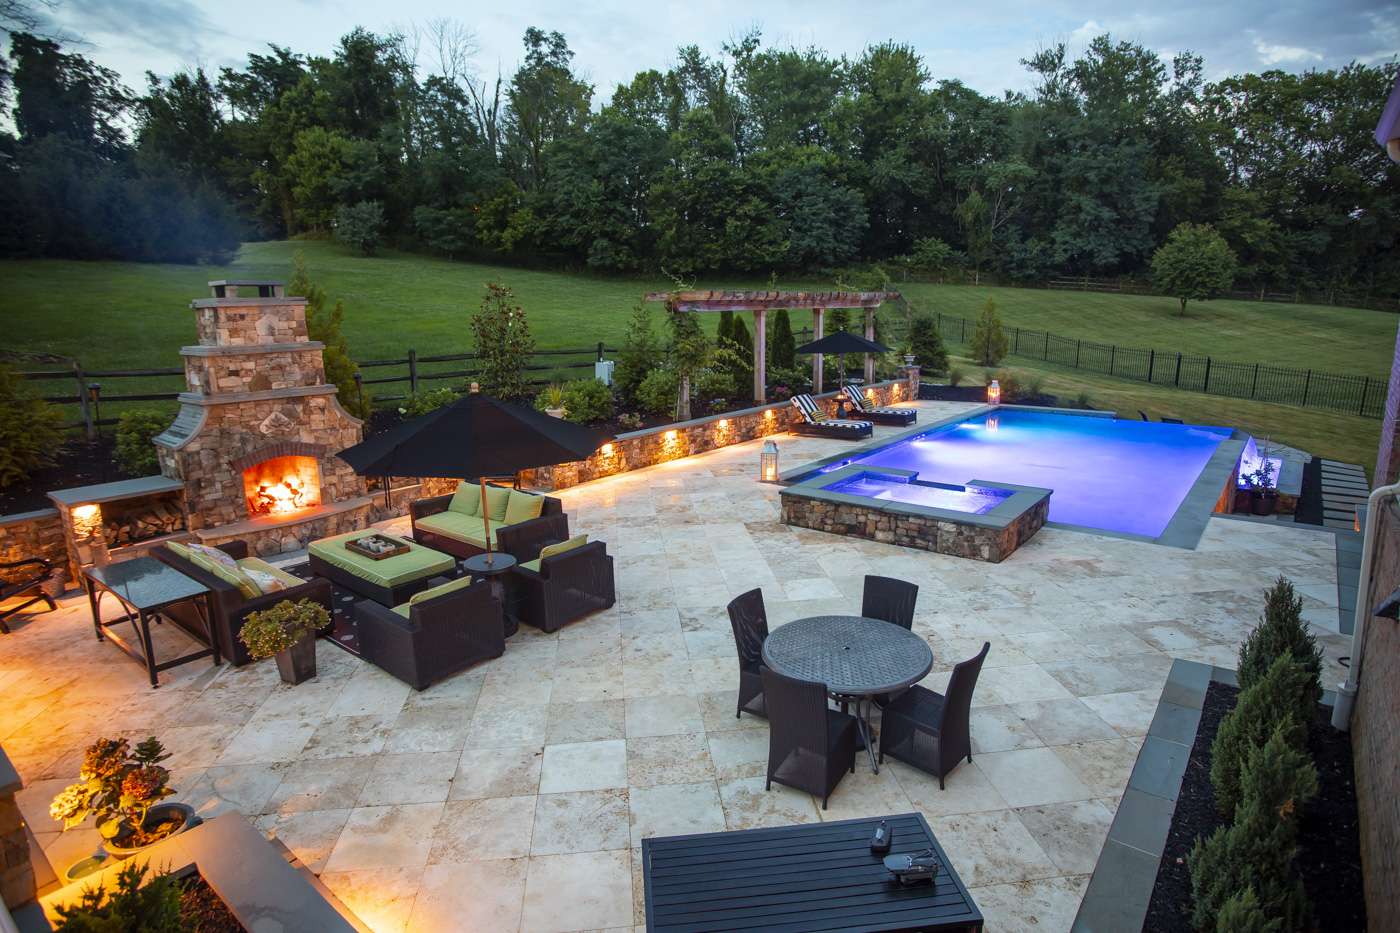 pool patio with natural stone, fire place, lighting, and hot tub